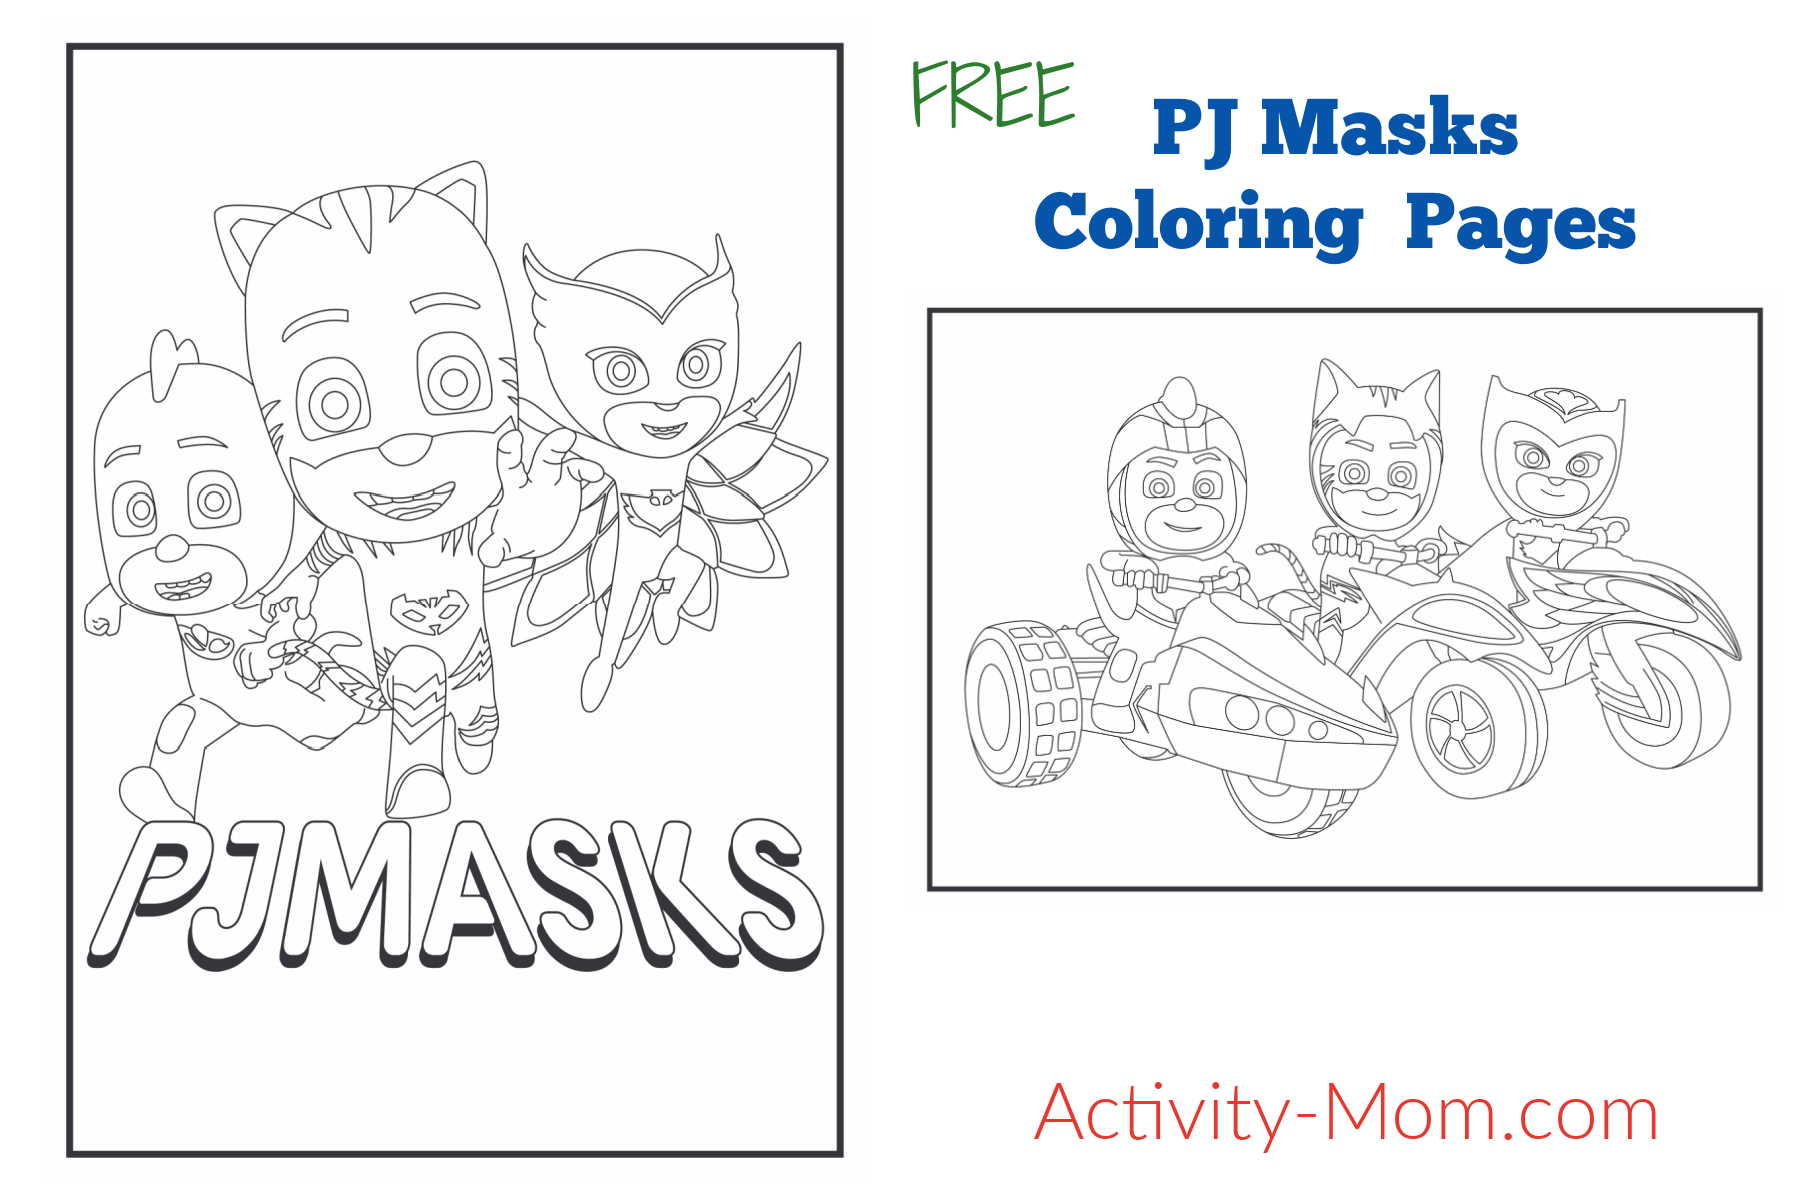 Pj masks coloring pages for kids free printable